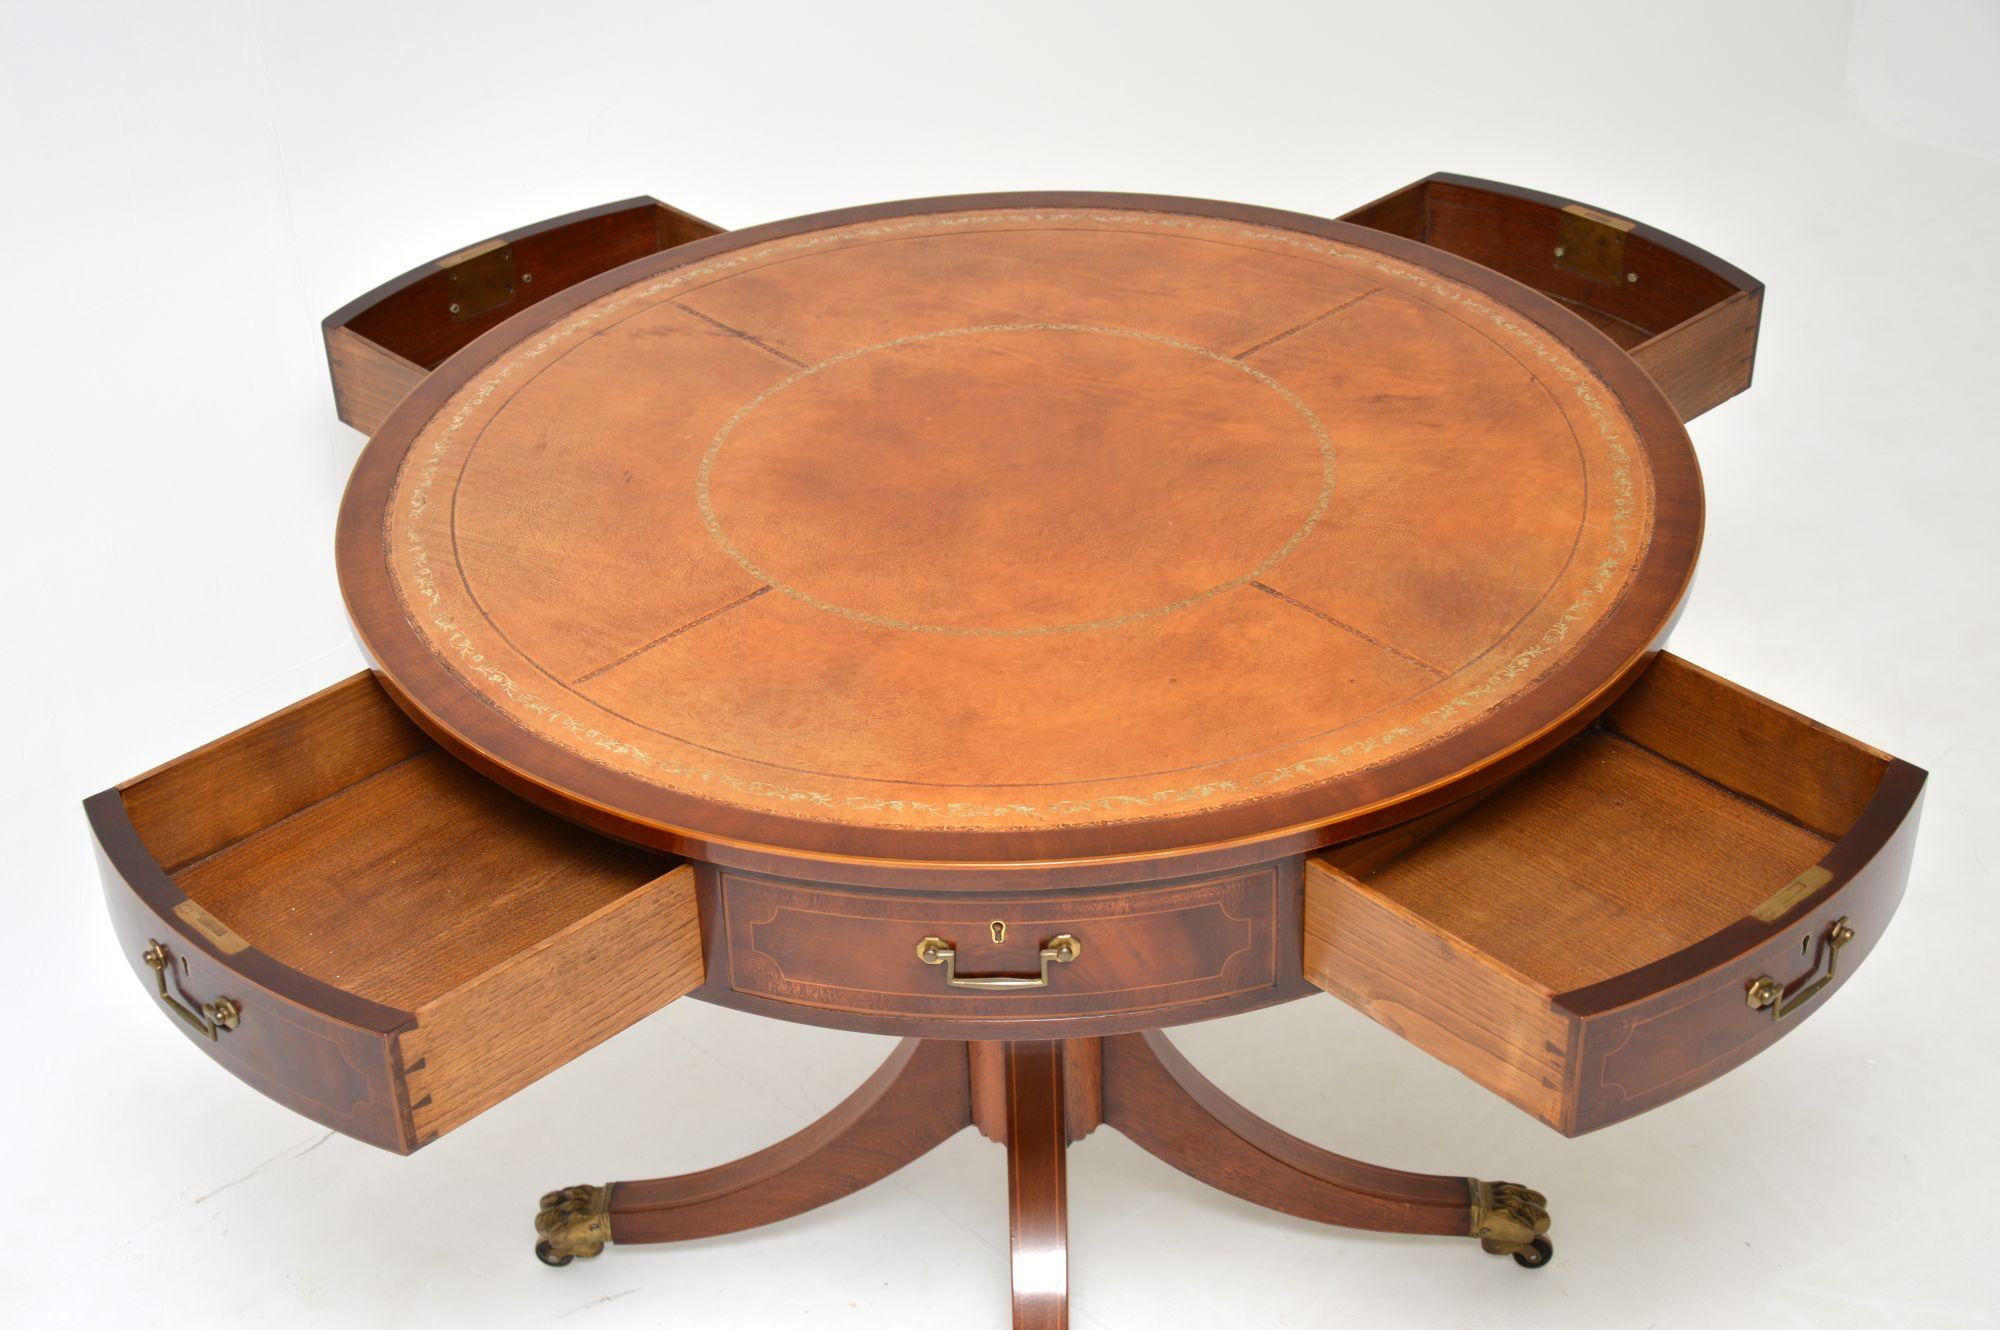 Antique Regency Style Leather Top Drum Table 1